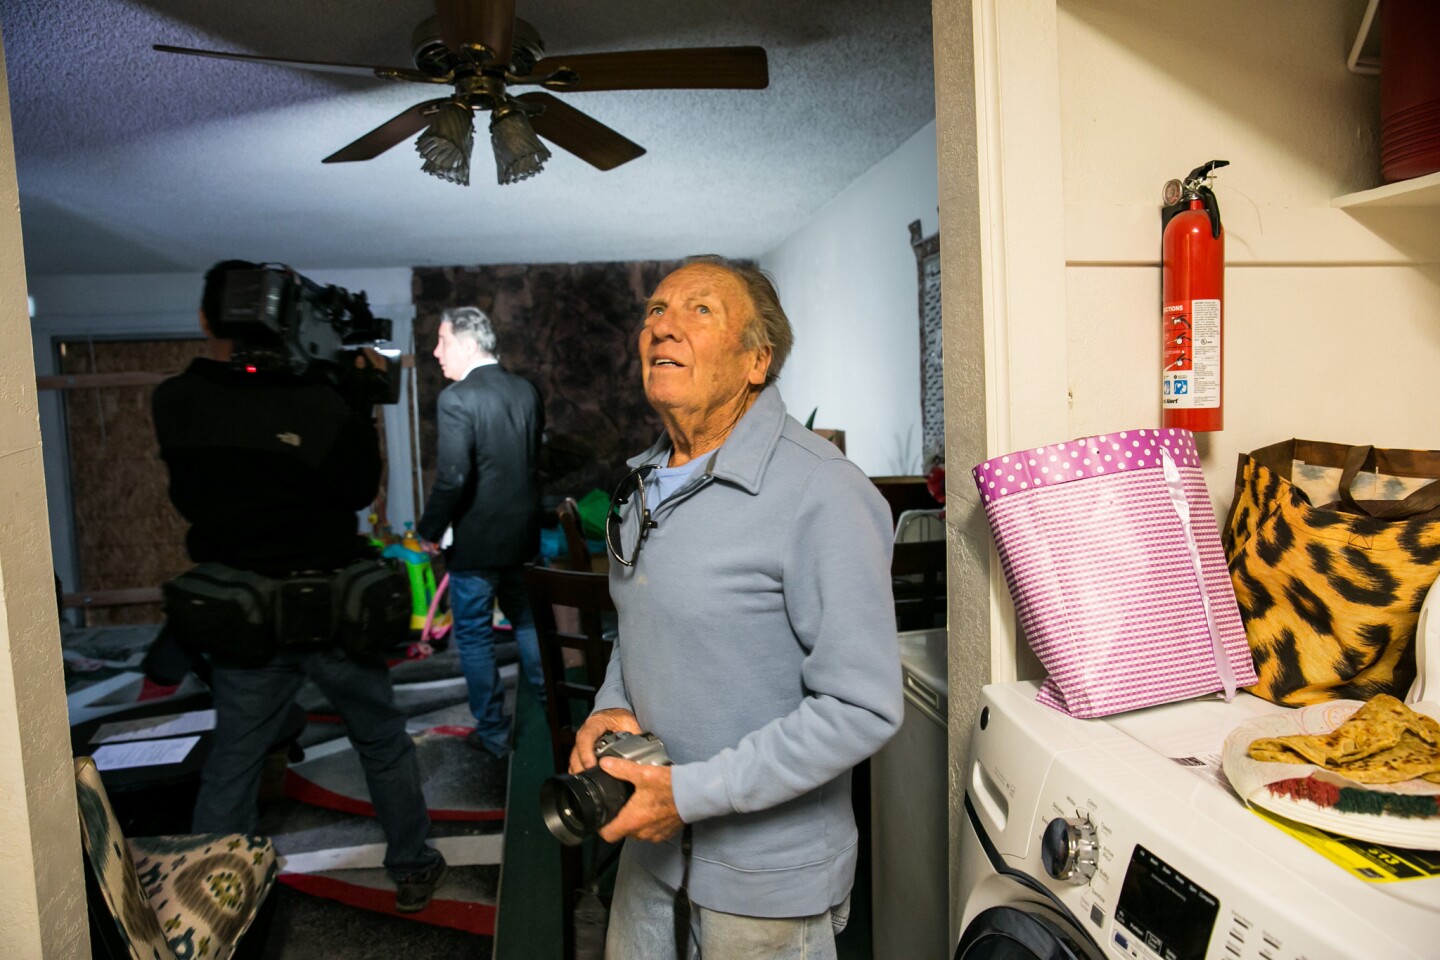 Landlord Doyle Miller, opens the doors and allows the media access inside the Redlands townhome where Syed Rizwan Farook and Tafsheen Malik, suspects of the deadly the recent mass shootings in San Bernardino, lived.